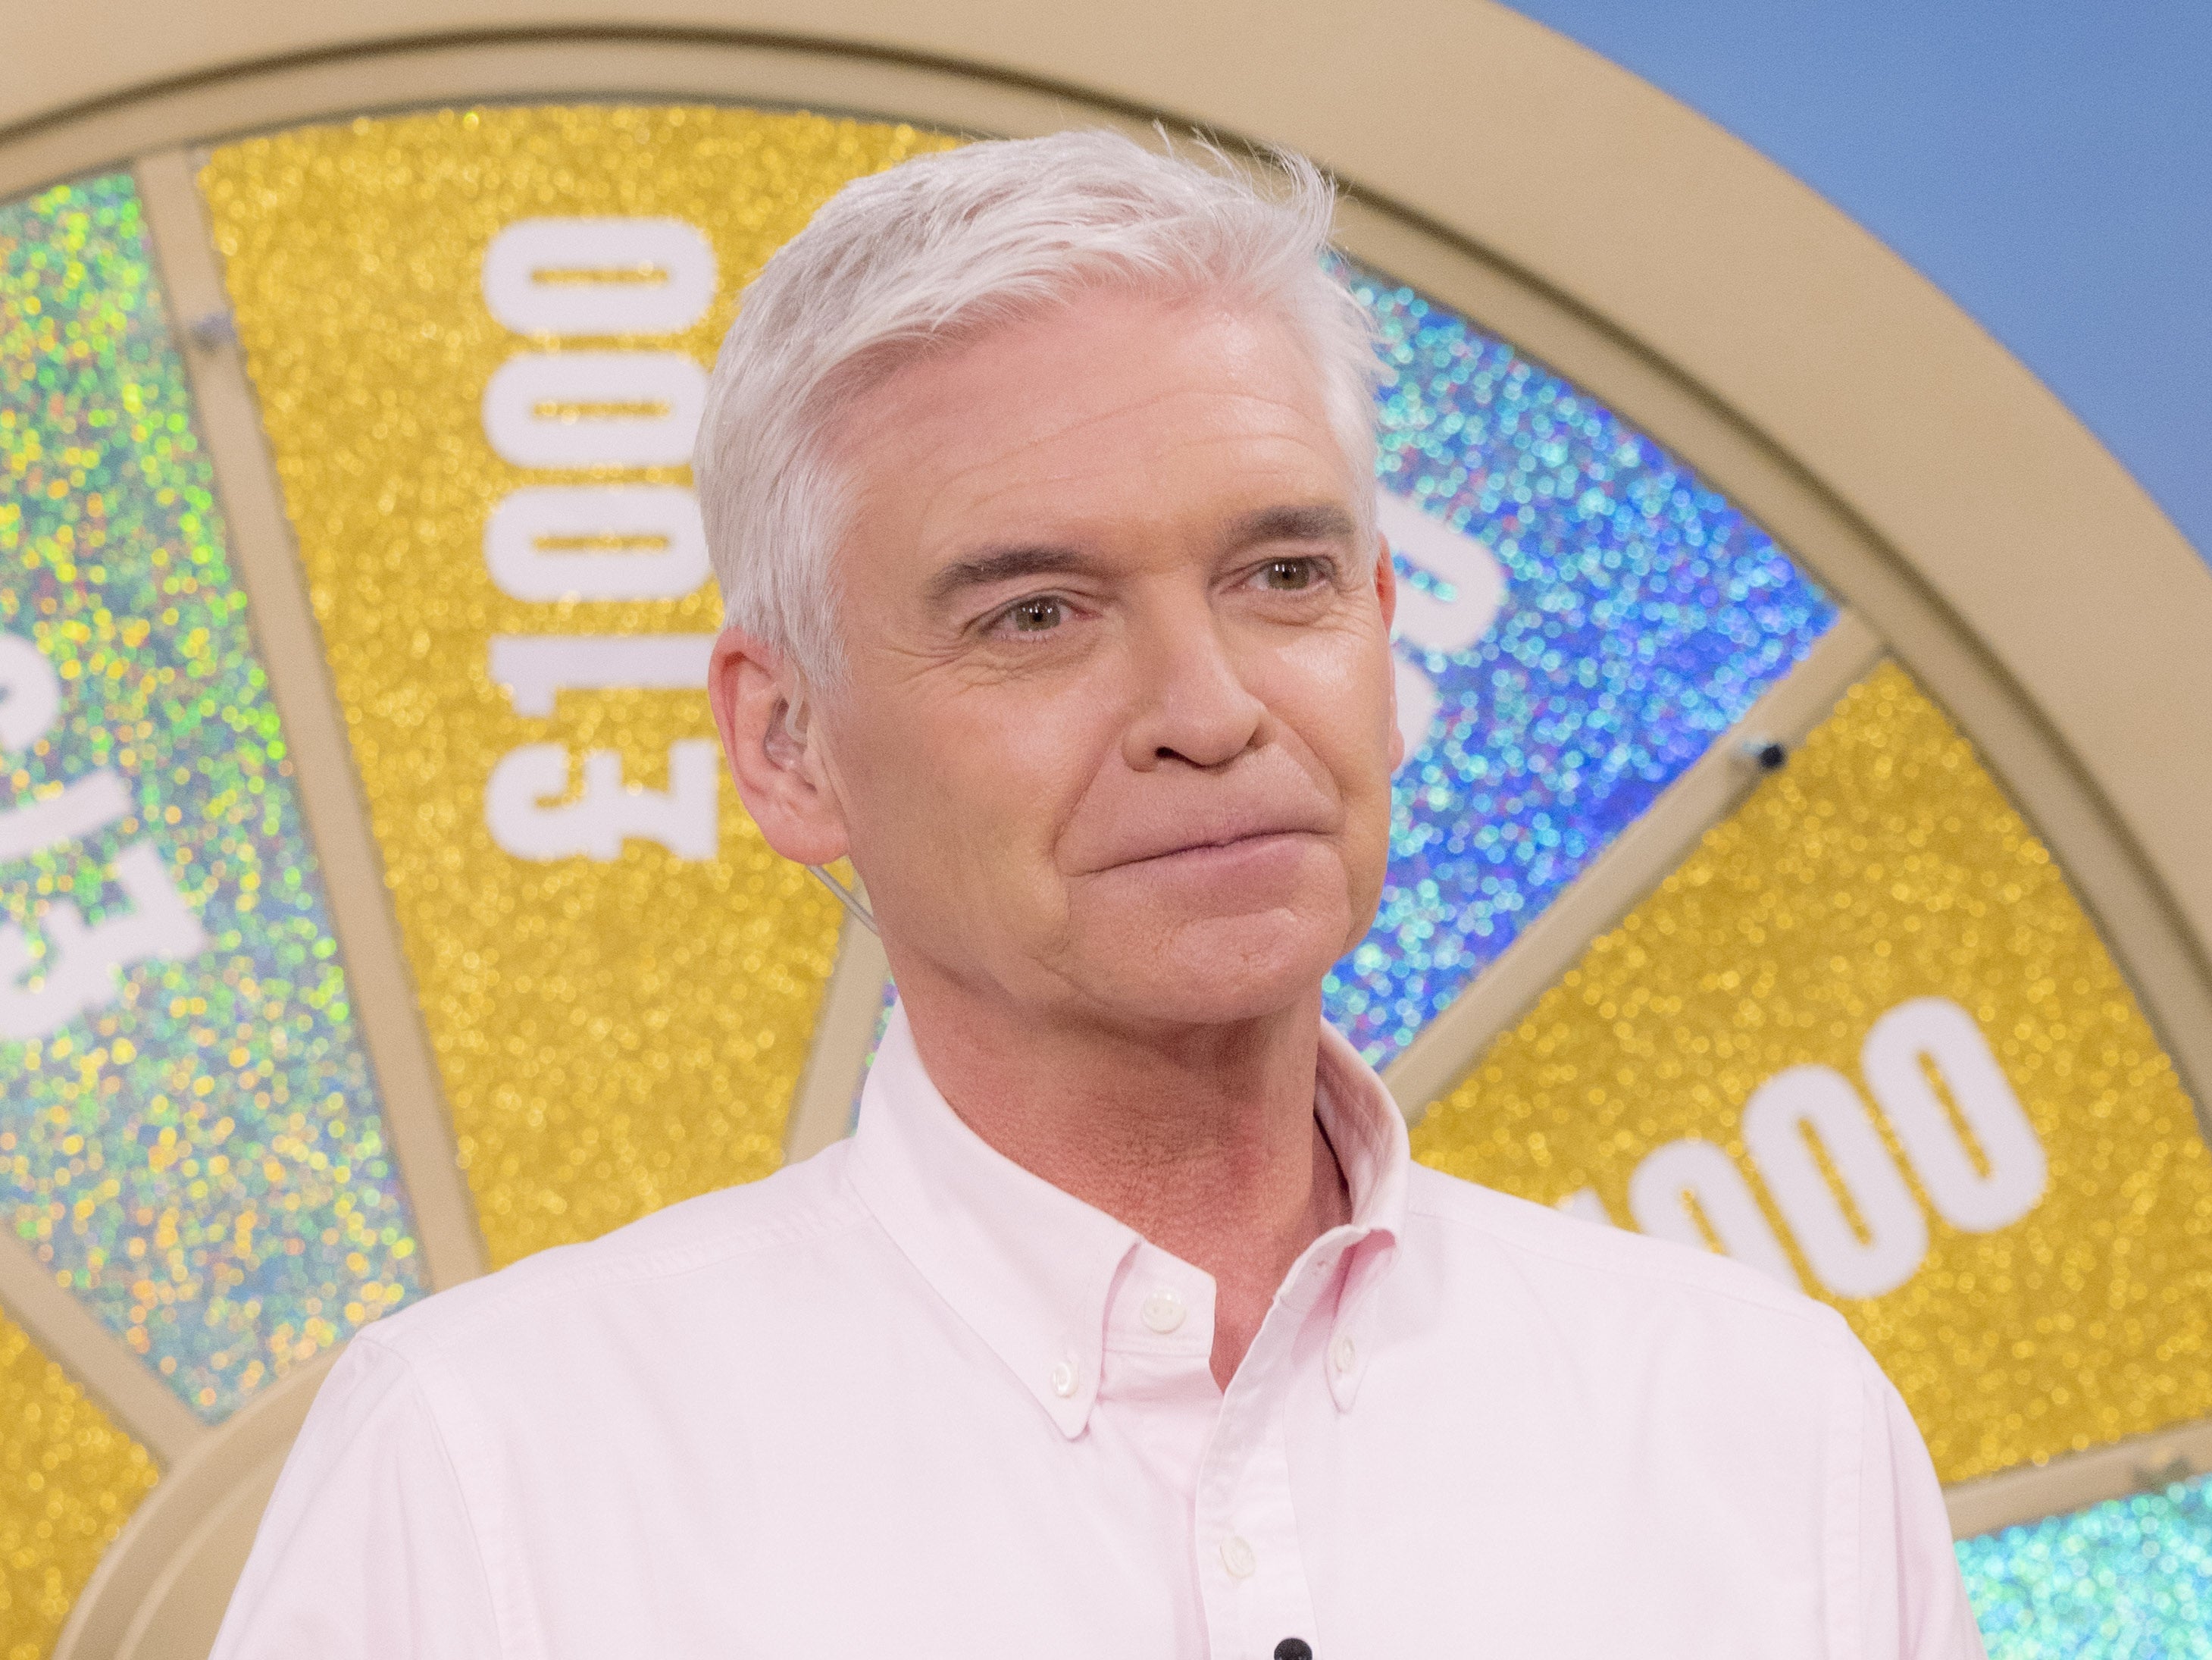 The former ‘This Morning’ presenter in one of his final appearances on the programme in April